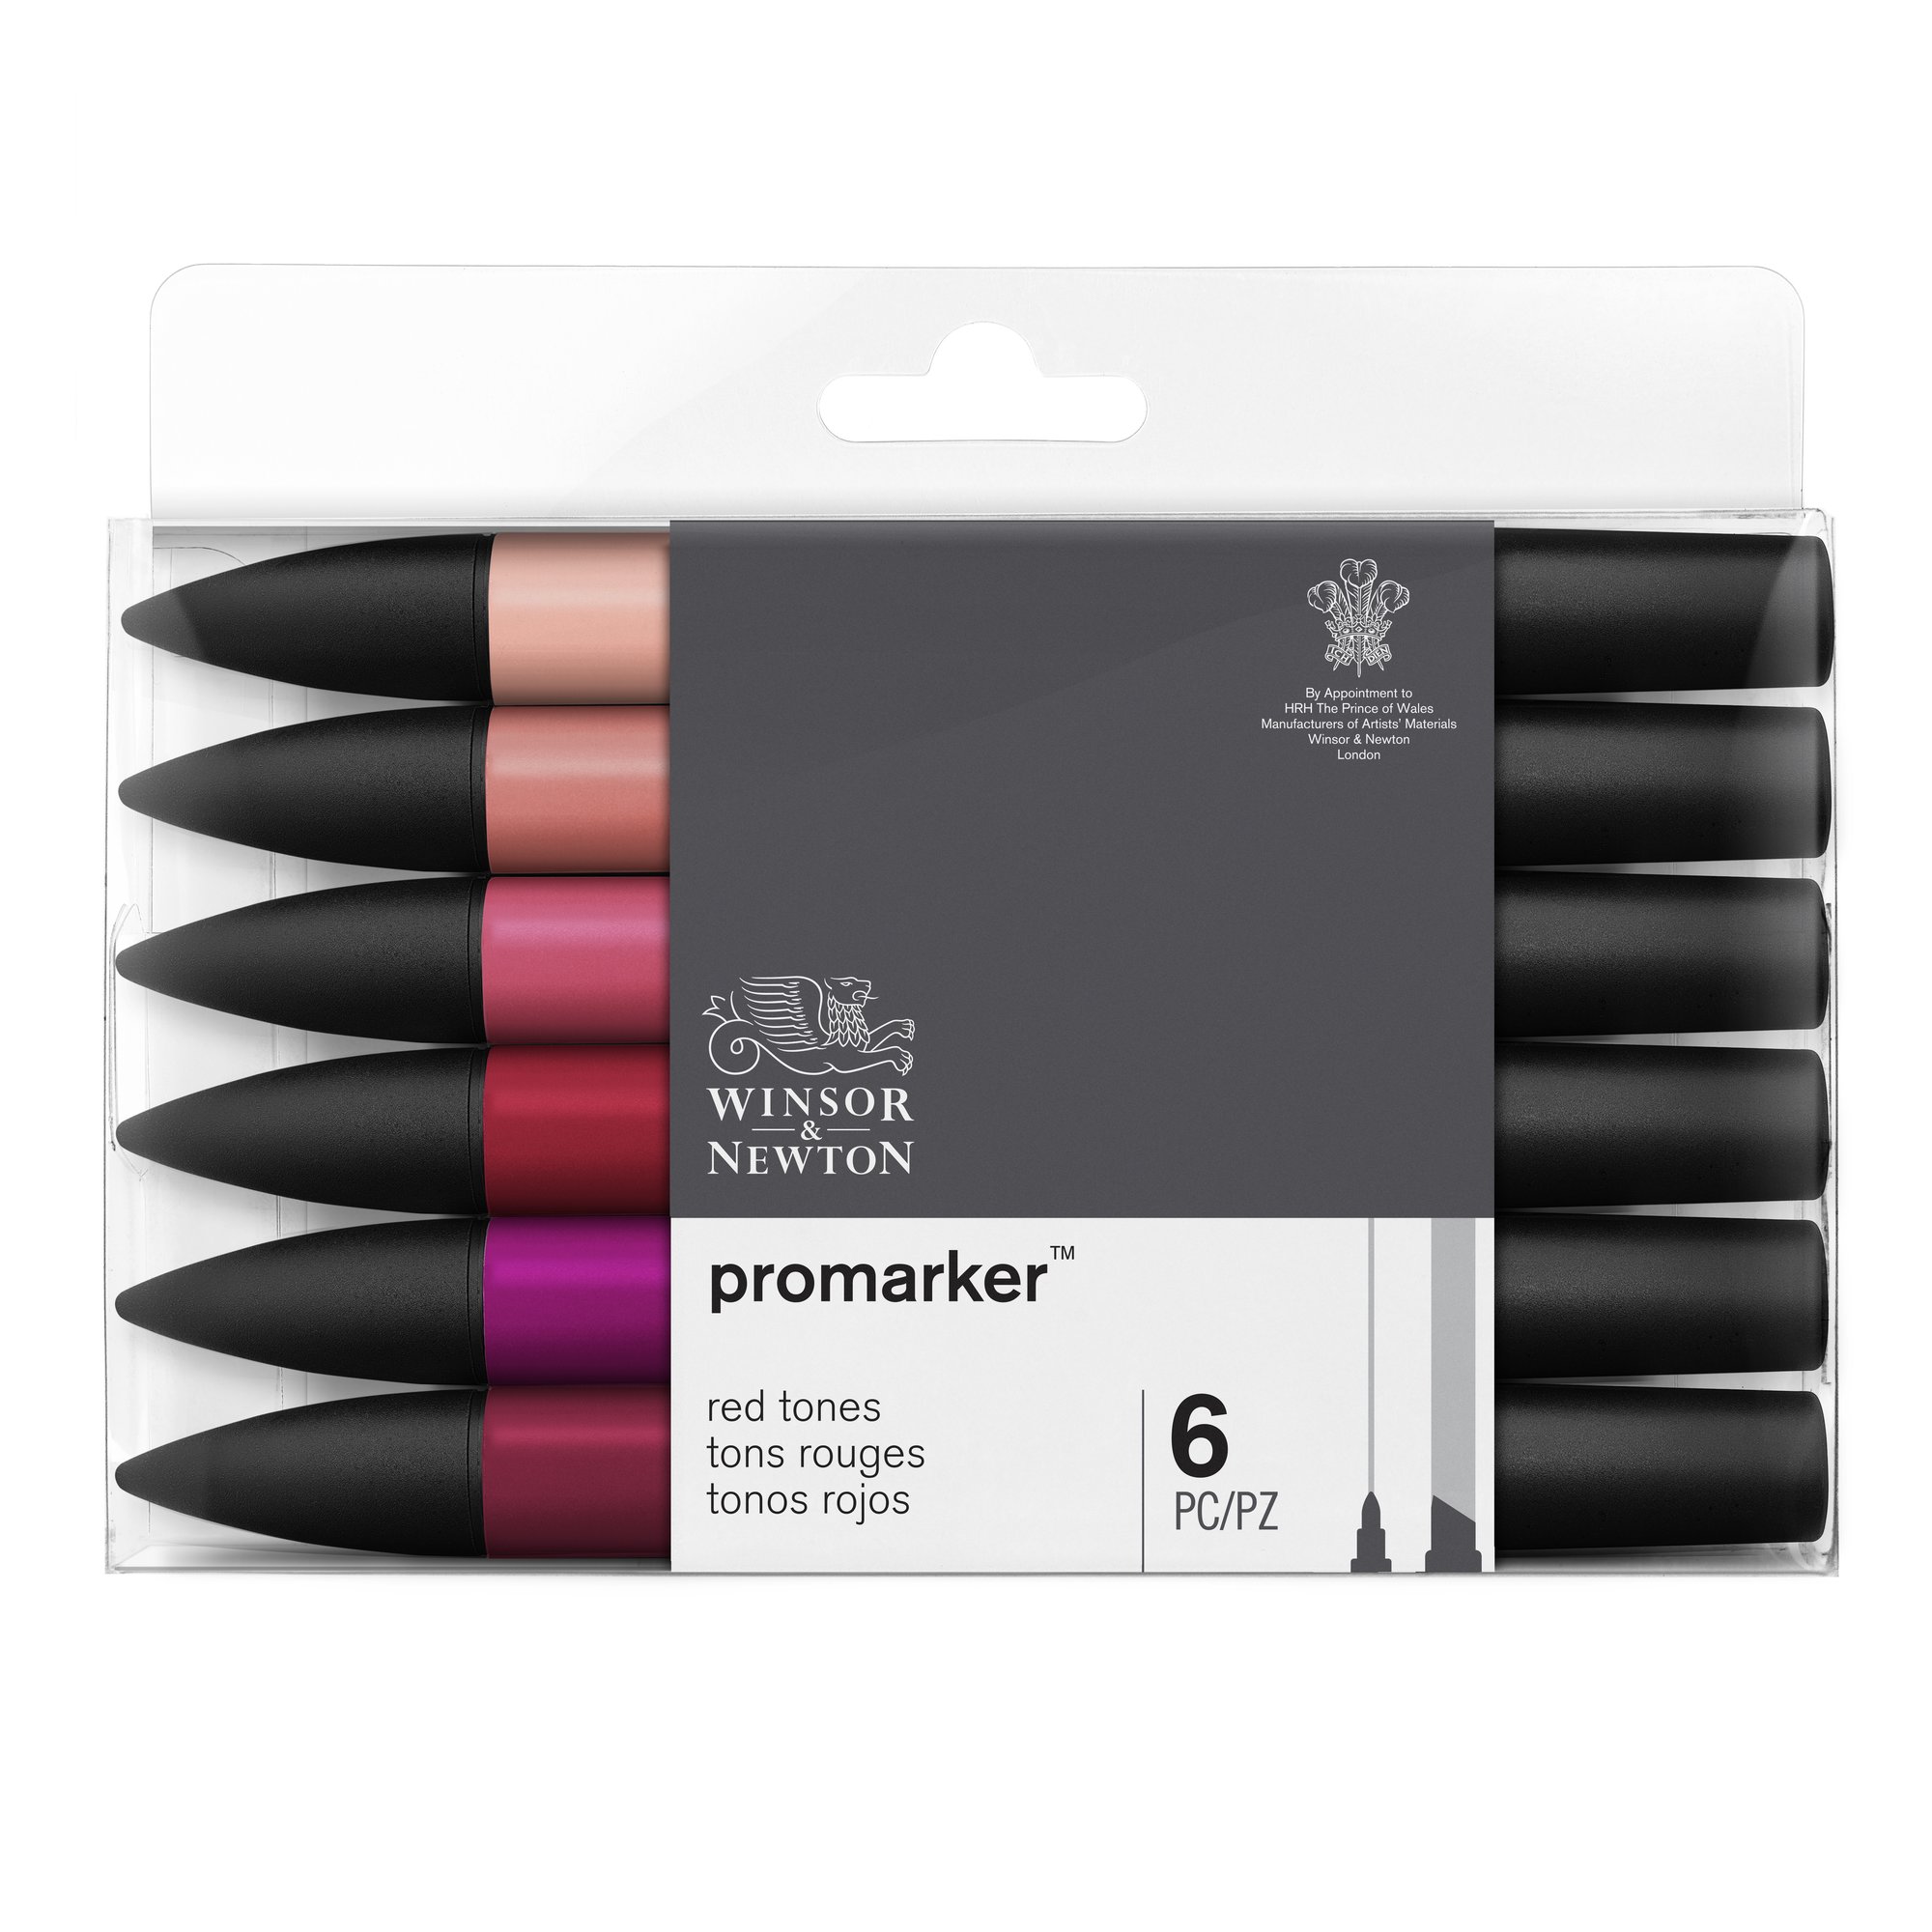 Winsor & Newton Promarker Graphic Drawing Pens Red Tones Set of 6 Markers